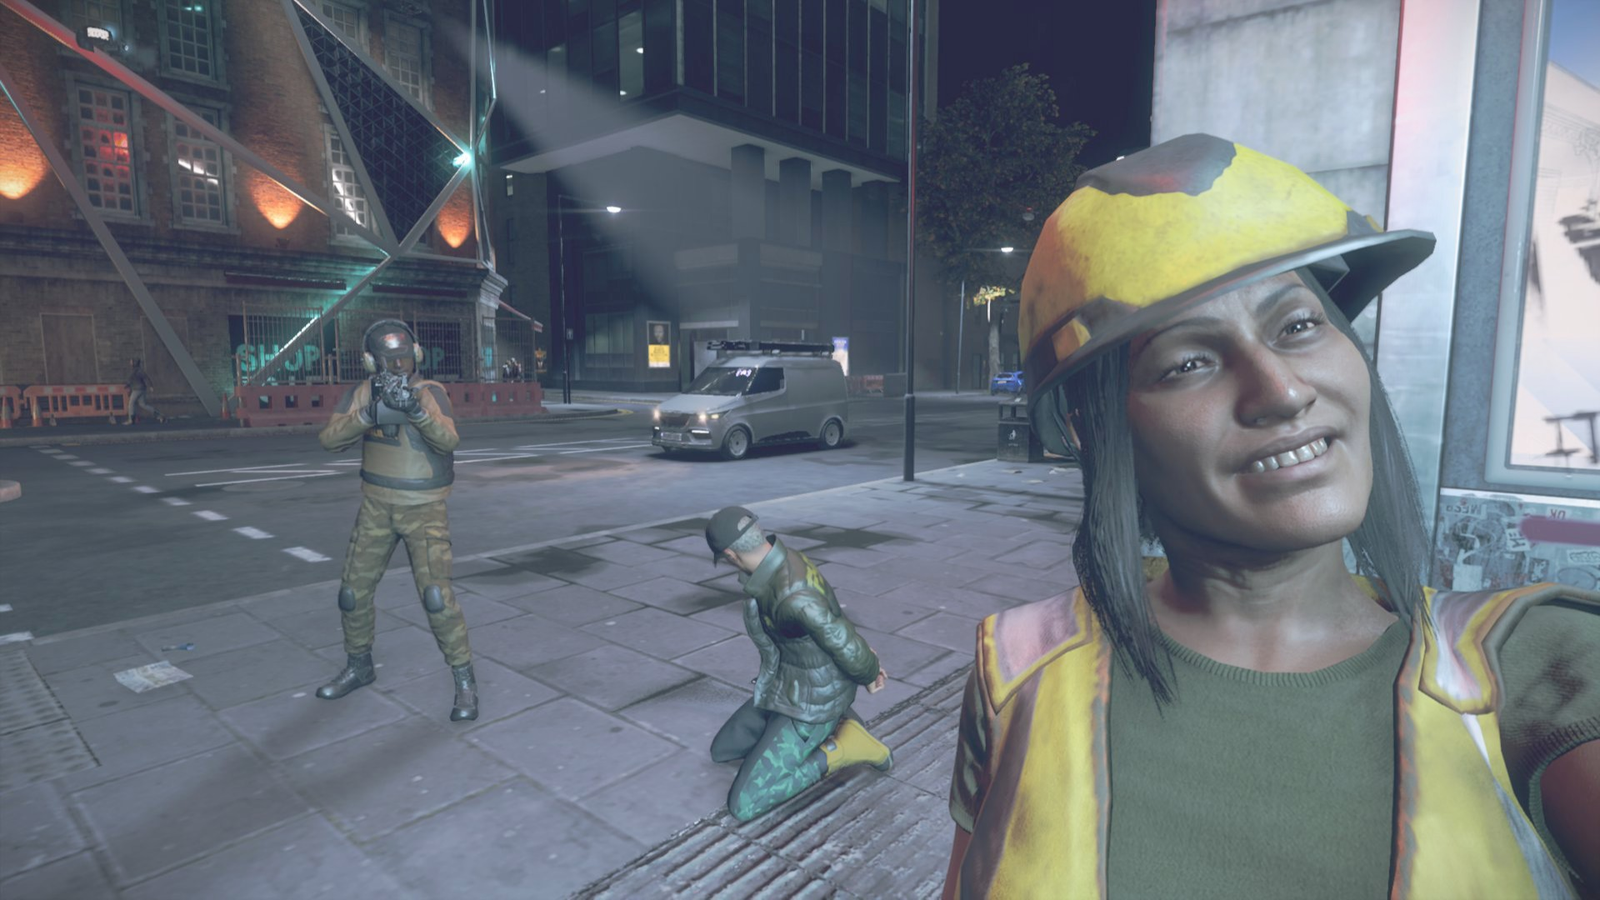 Watch Dogs Legion Receives Mysterious New Update After Ending